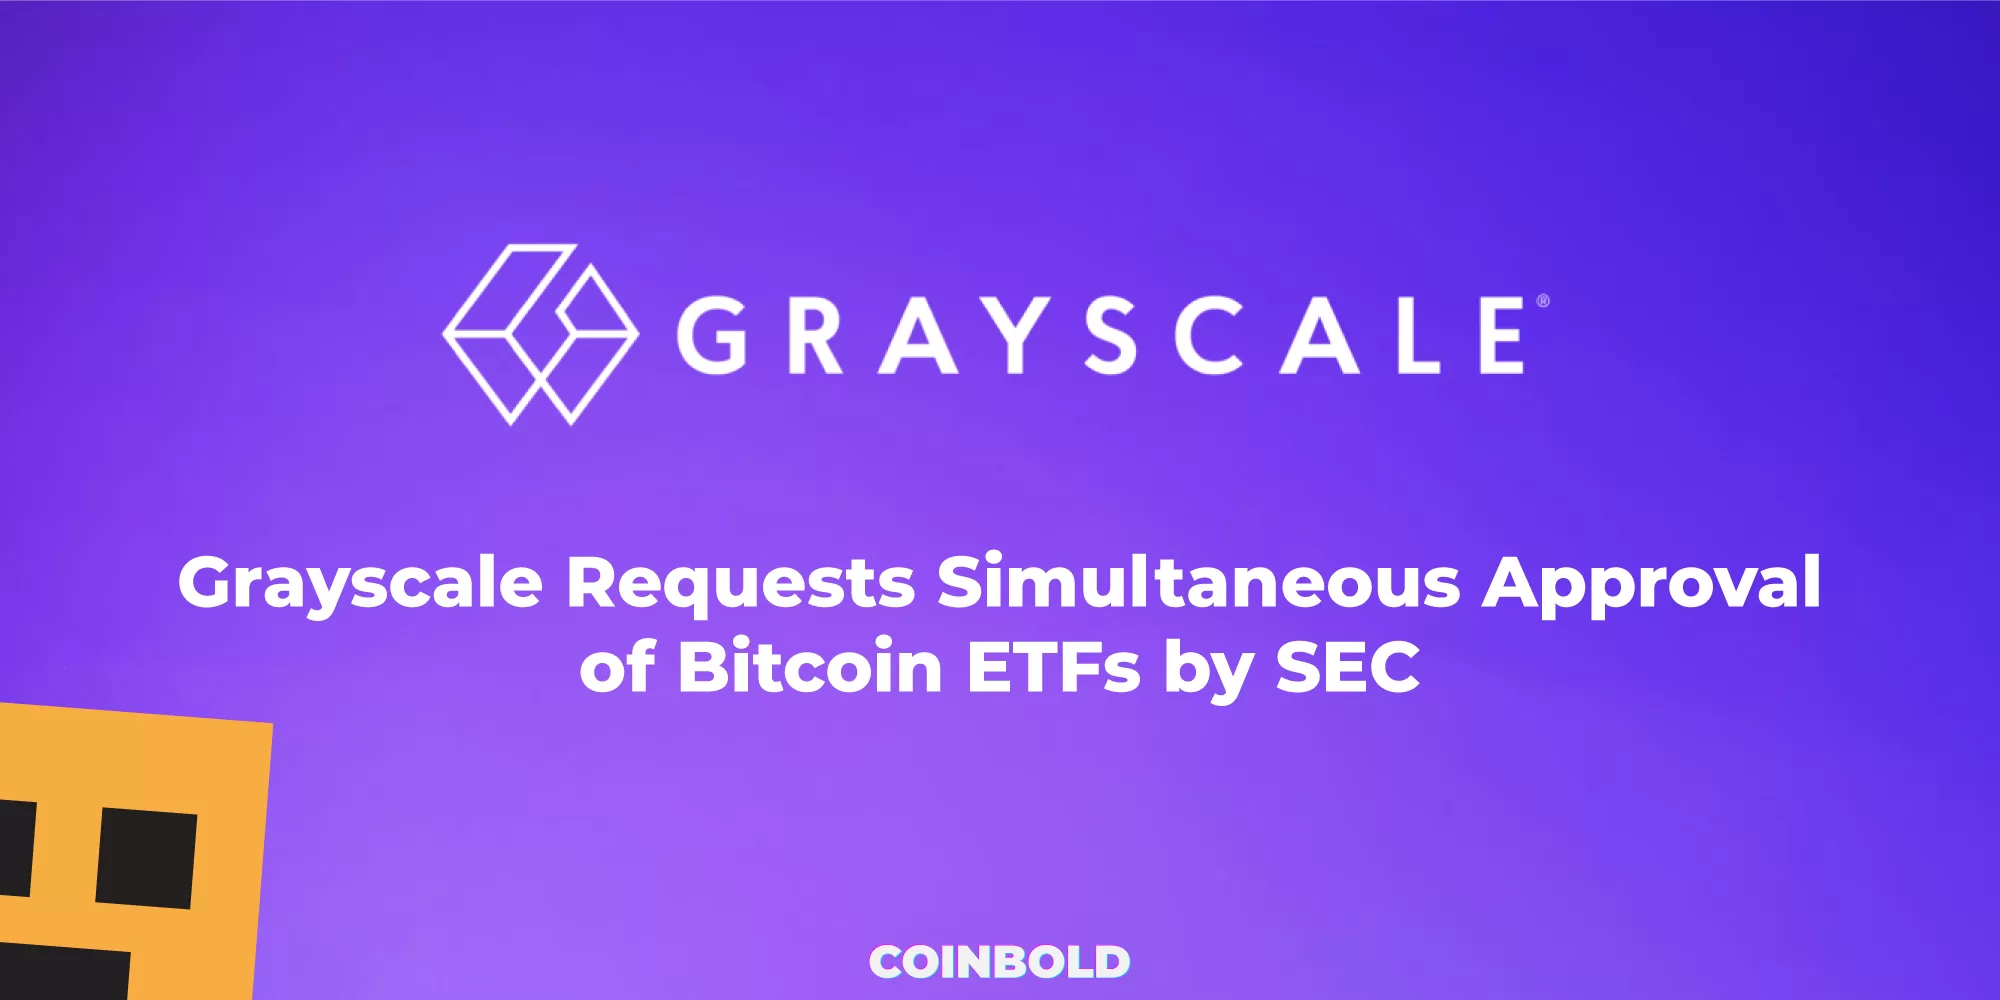 Grayscale Requests Simultaneous Approval of Bitcoin ETFs by SEC